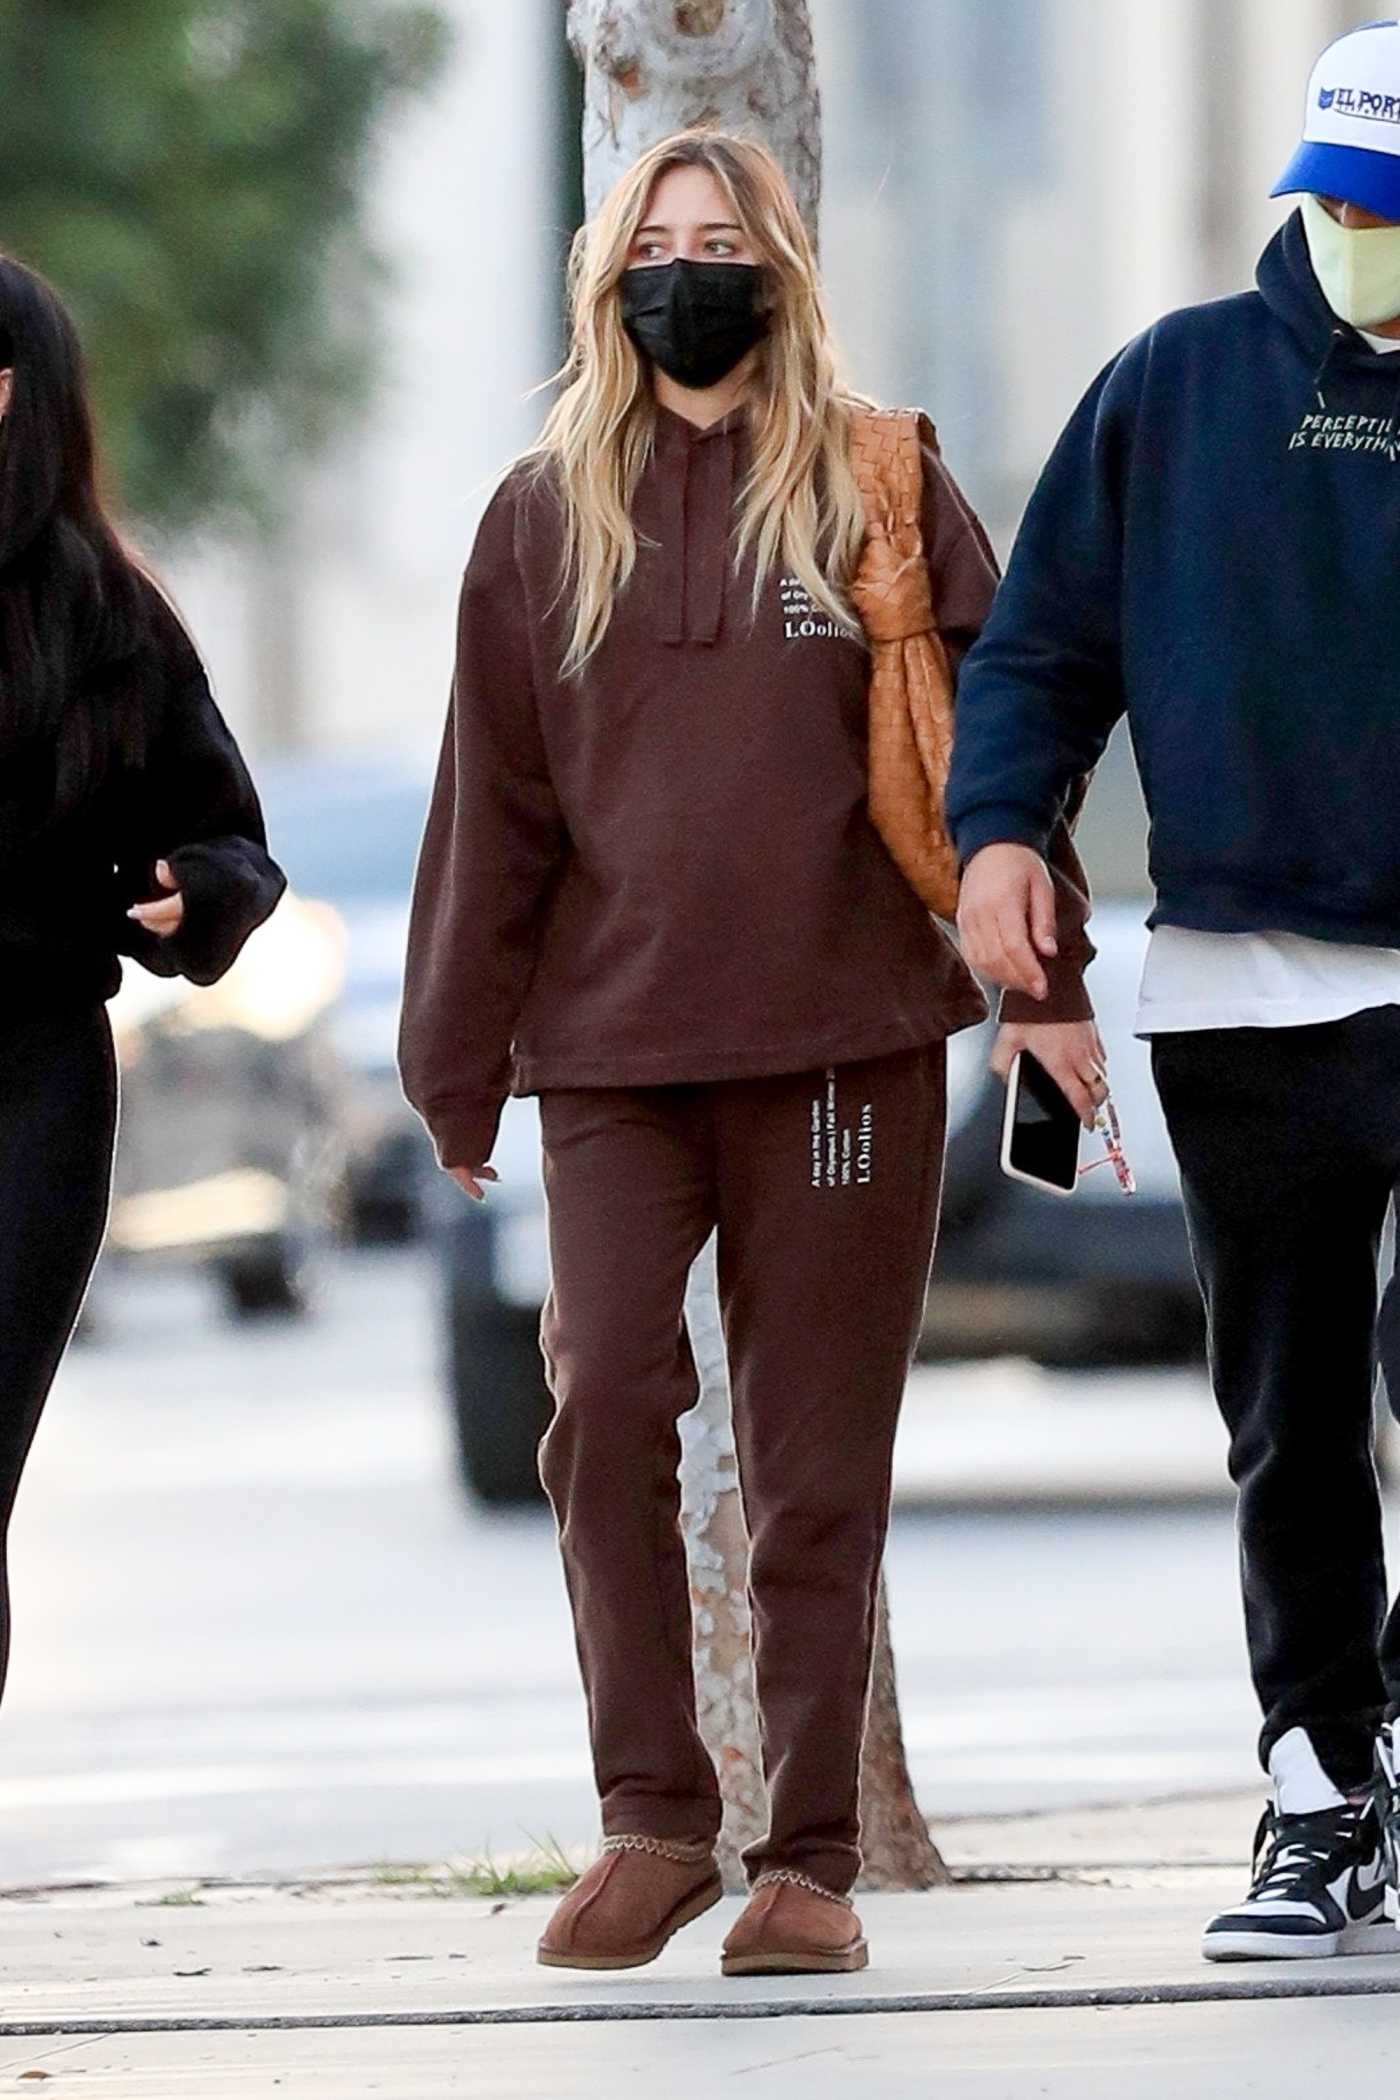 Delilah Belle Hamlin in a Brown Sweatsuit Was Seen Out in West Hollywood 02/02/2021